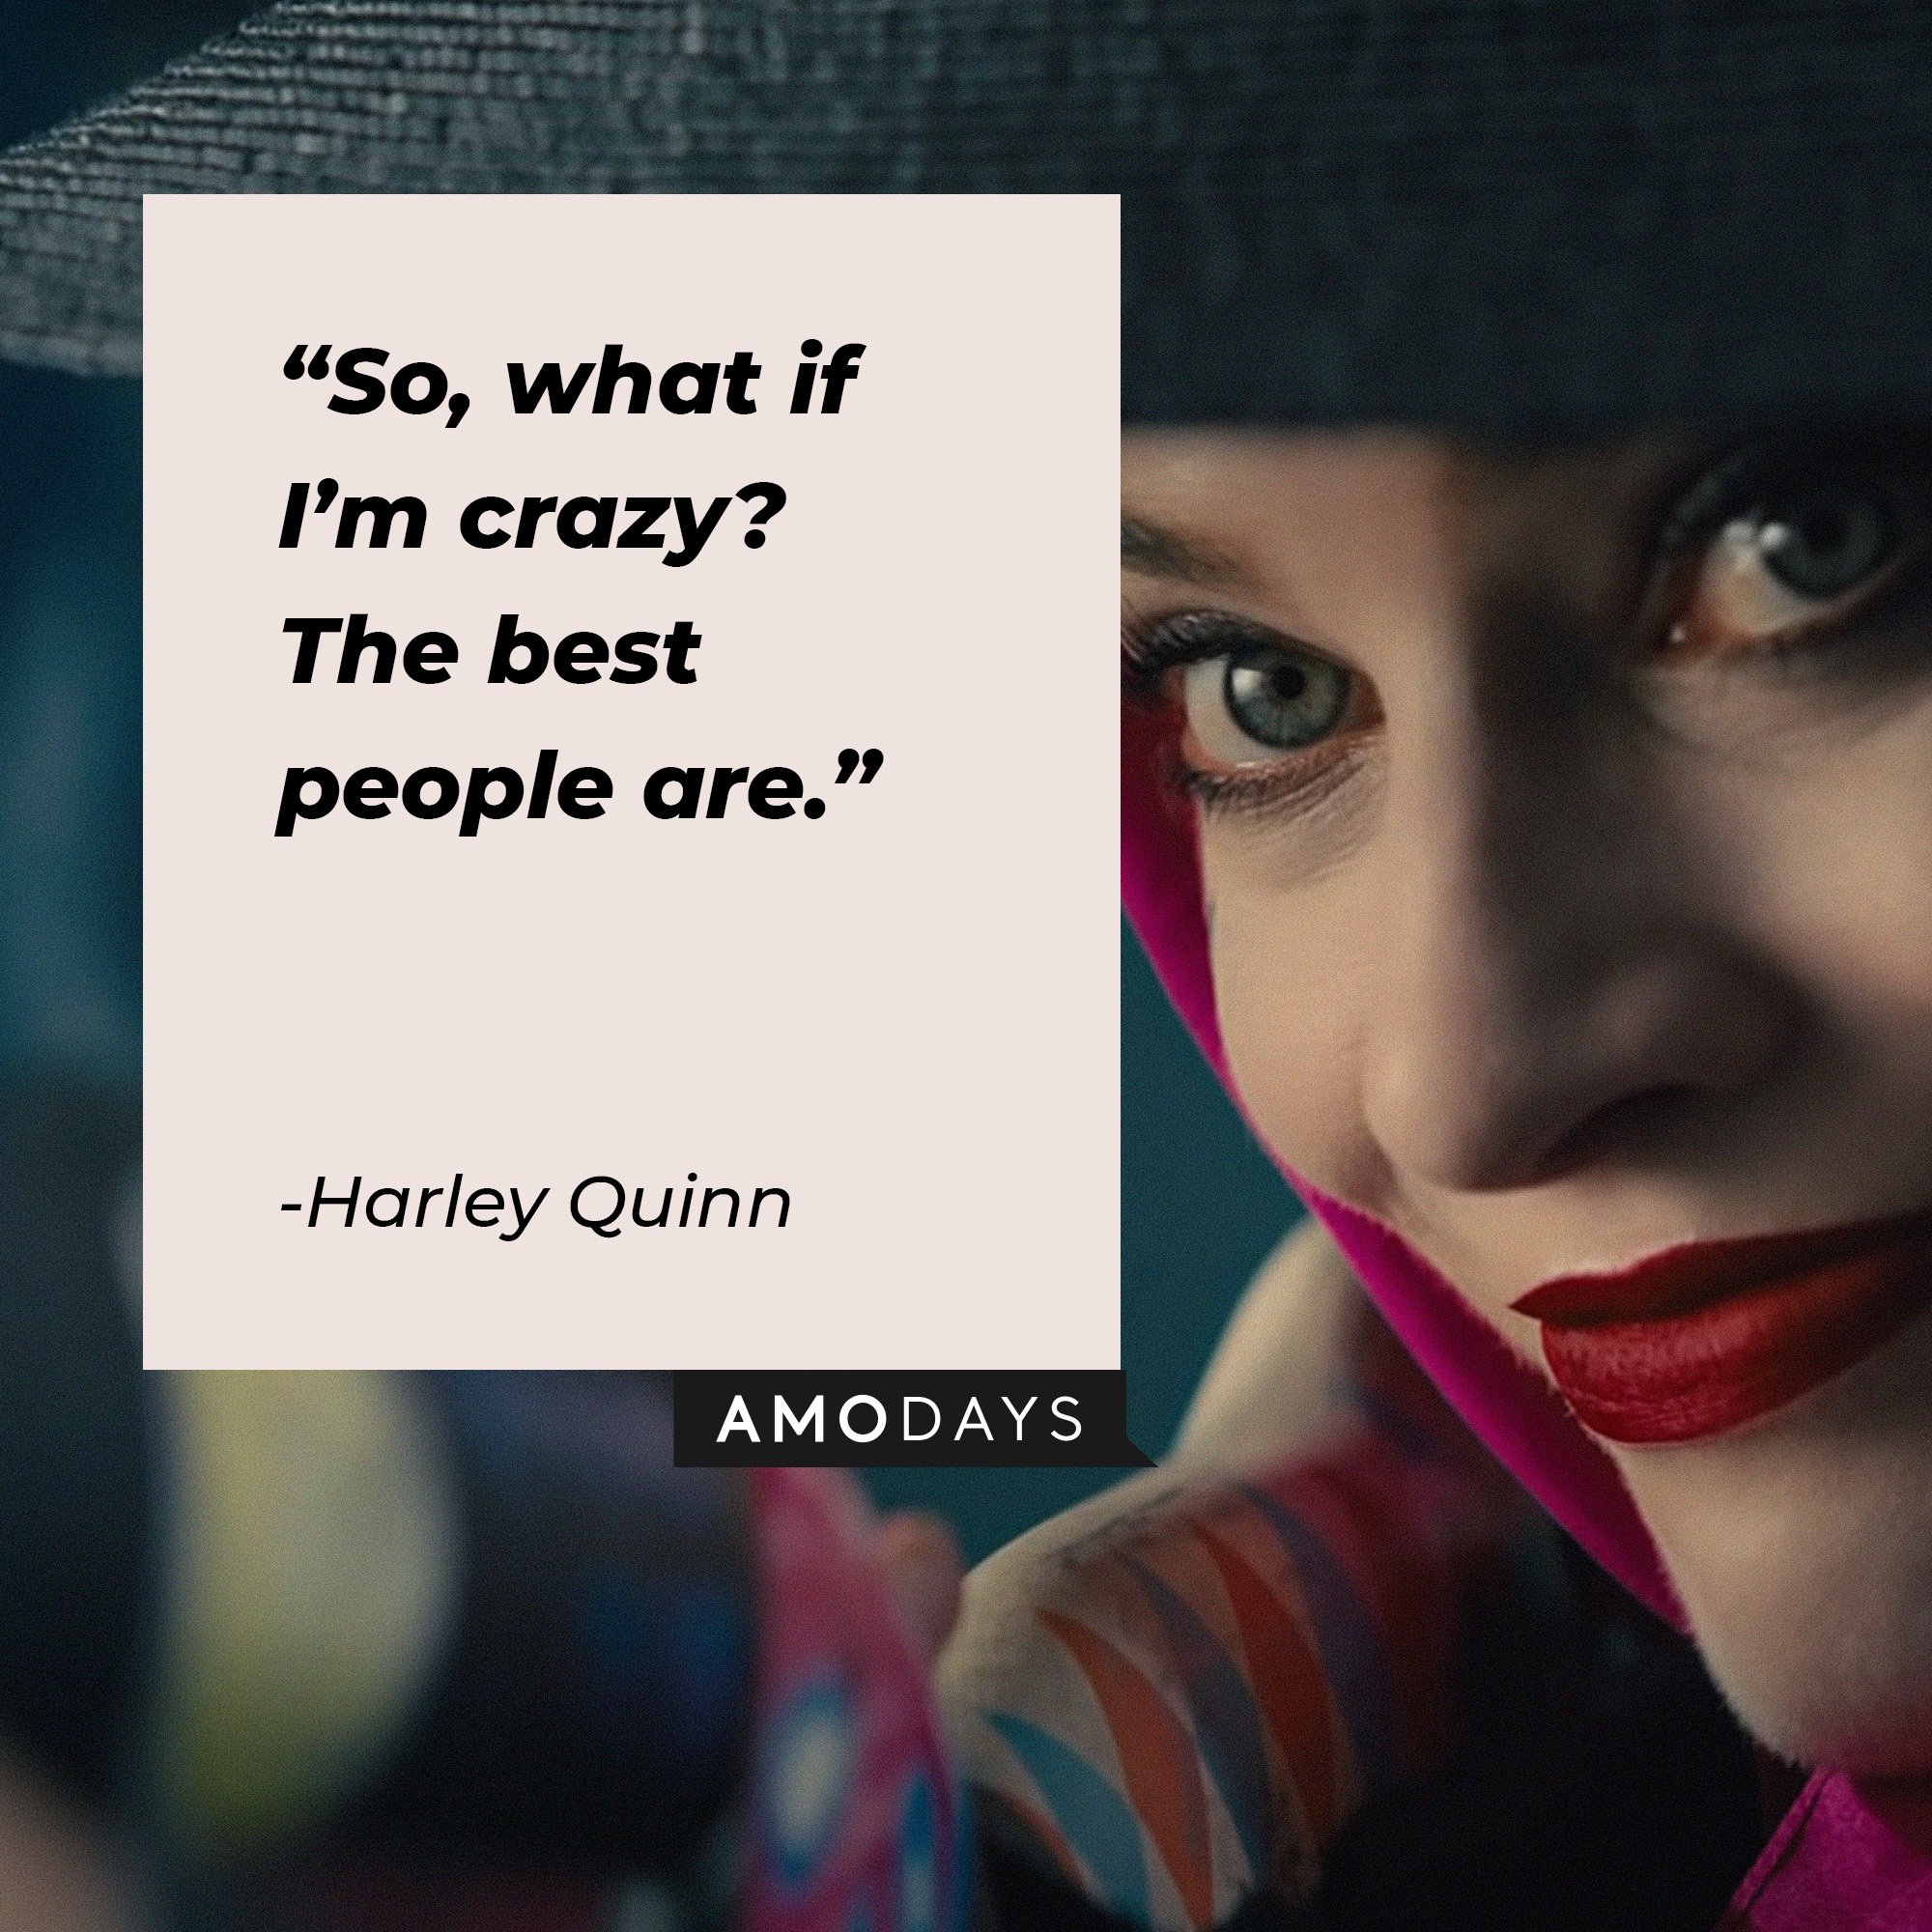 Harley Quinn’s quote: “So, what if I’m crazy? The best people are.” | Source: Image: AmoDays